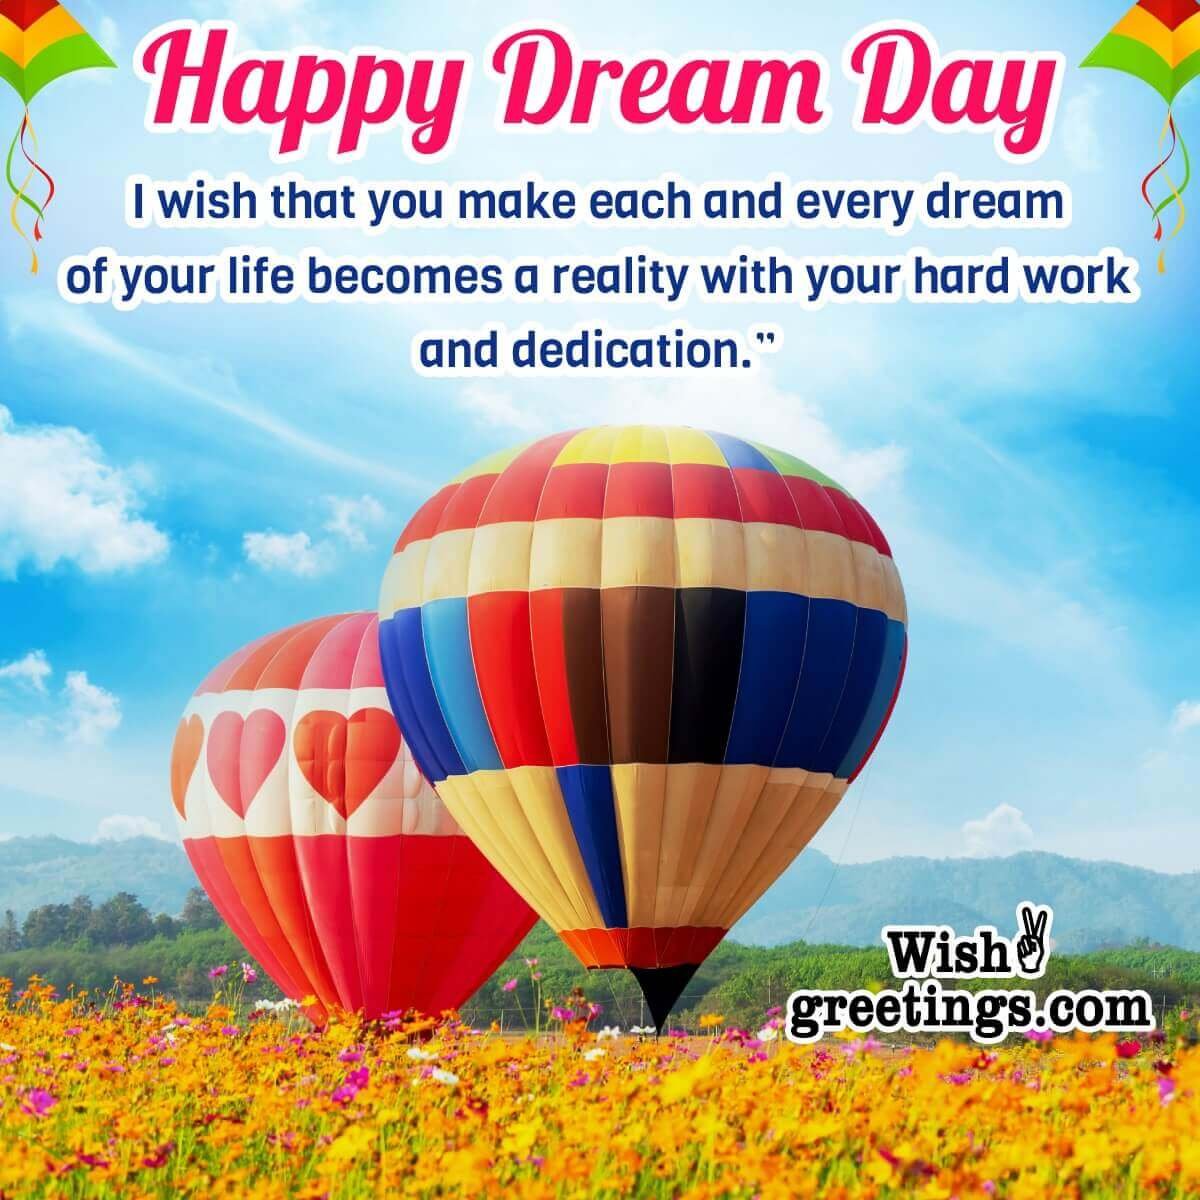 Happy Dream Day Wishes Messages